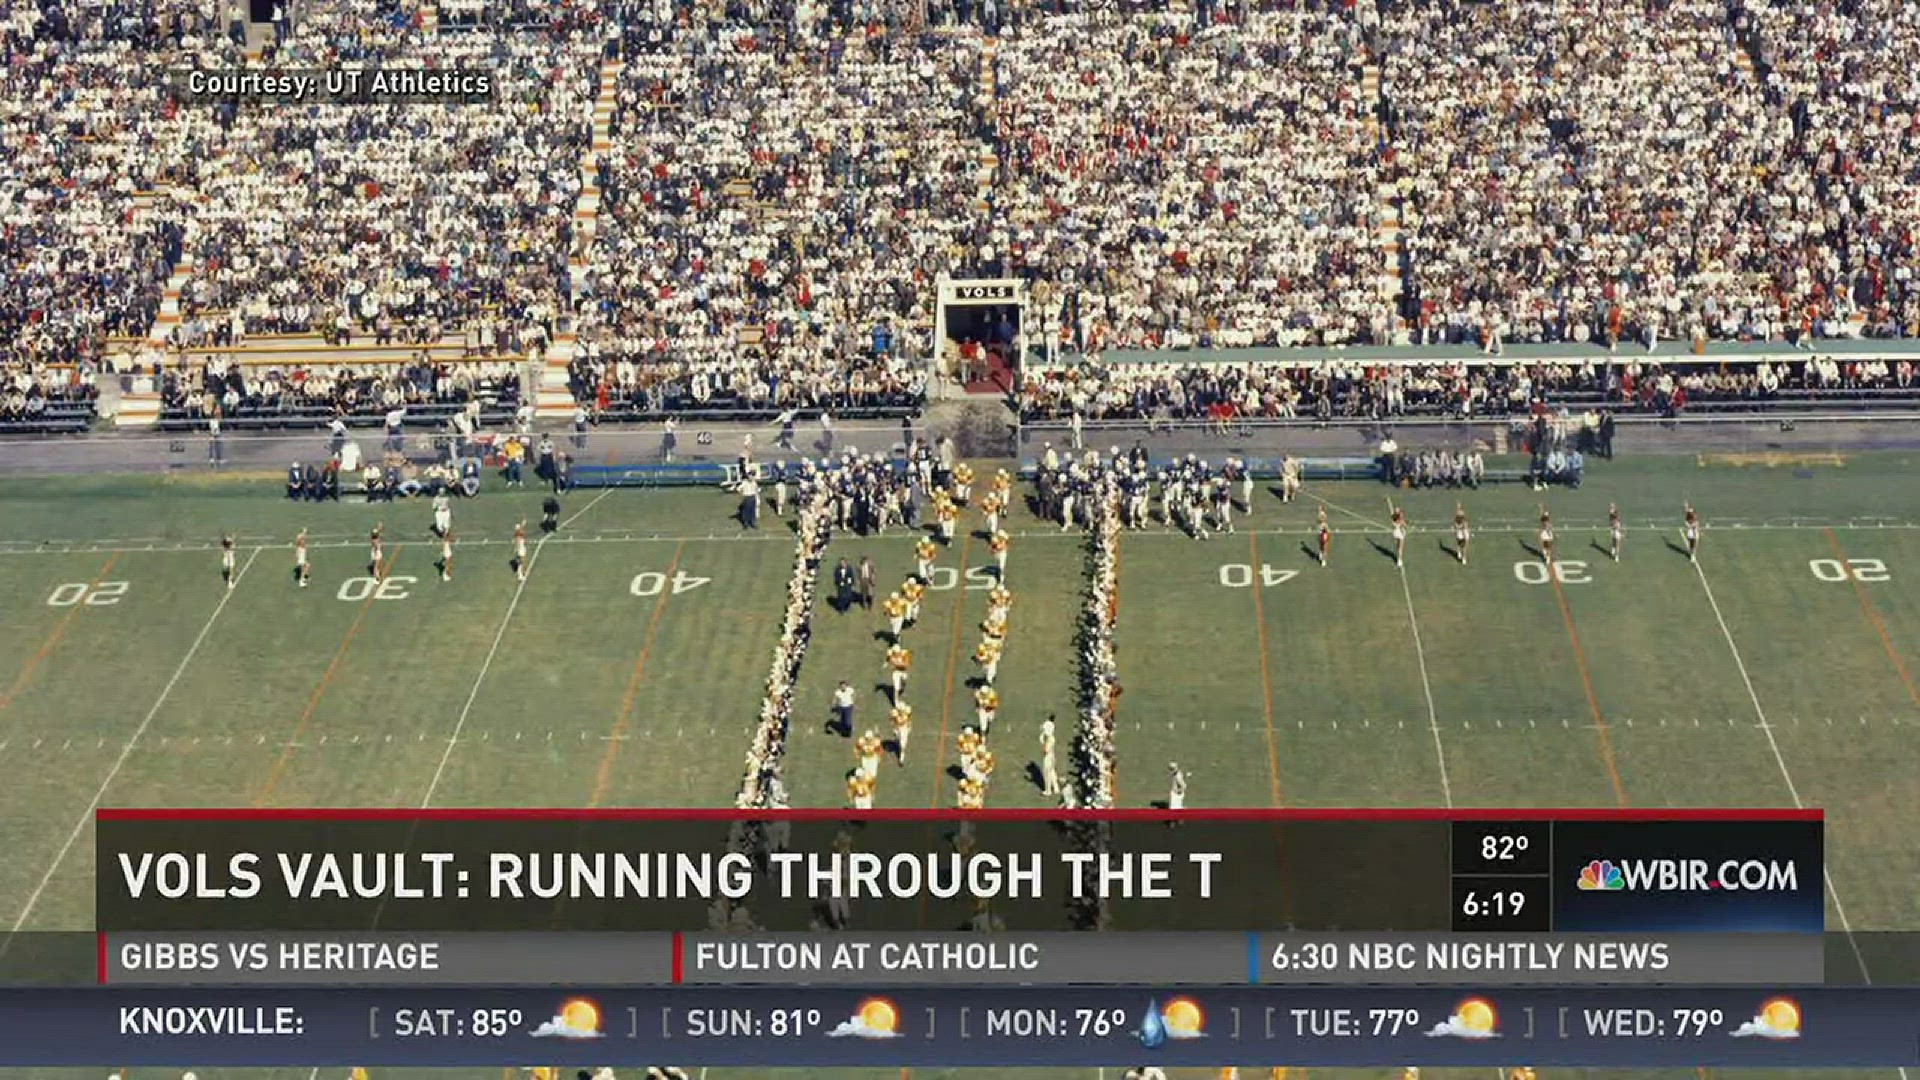 A look at a great tradition in UT history - running through the T.